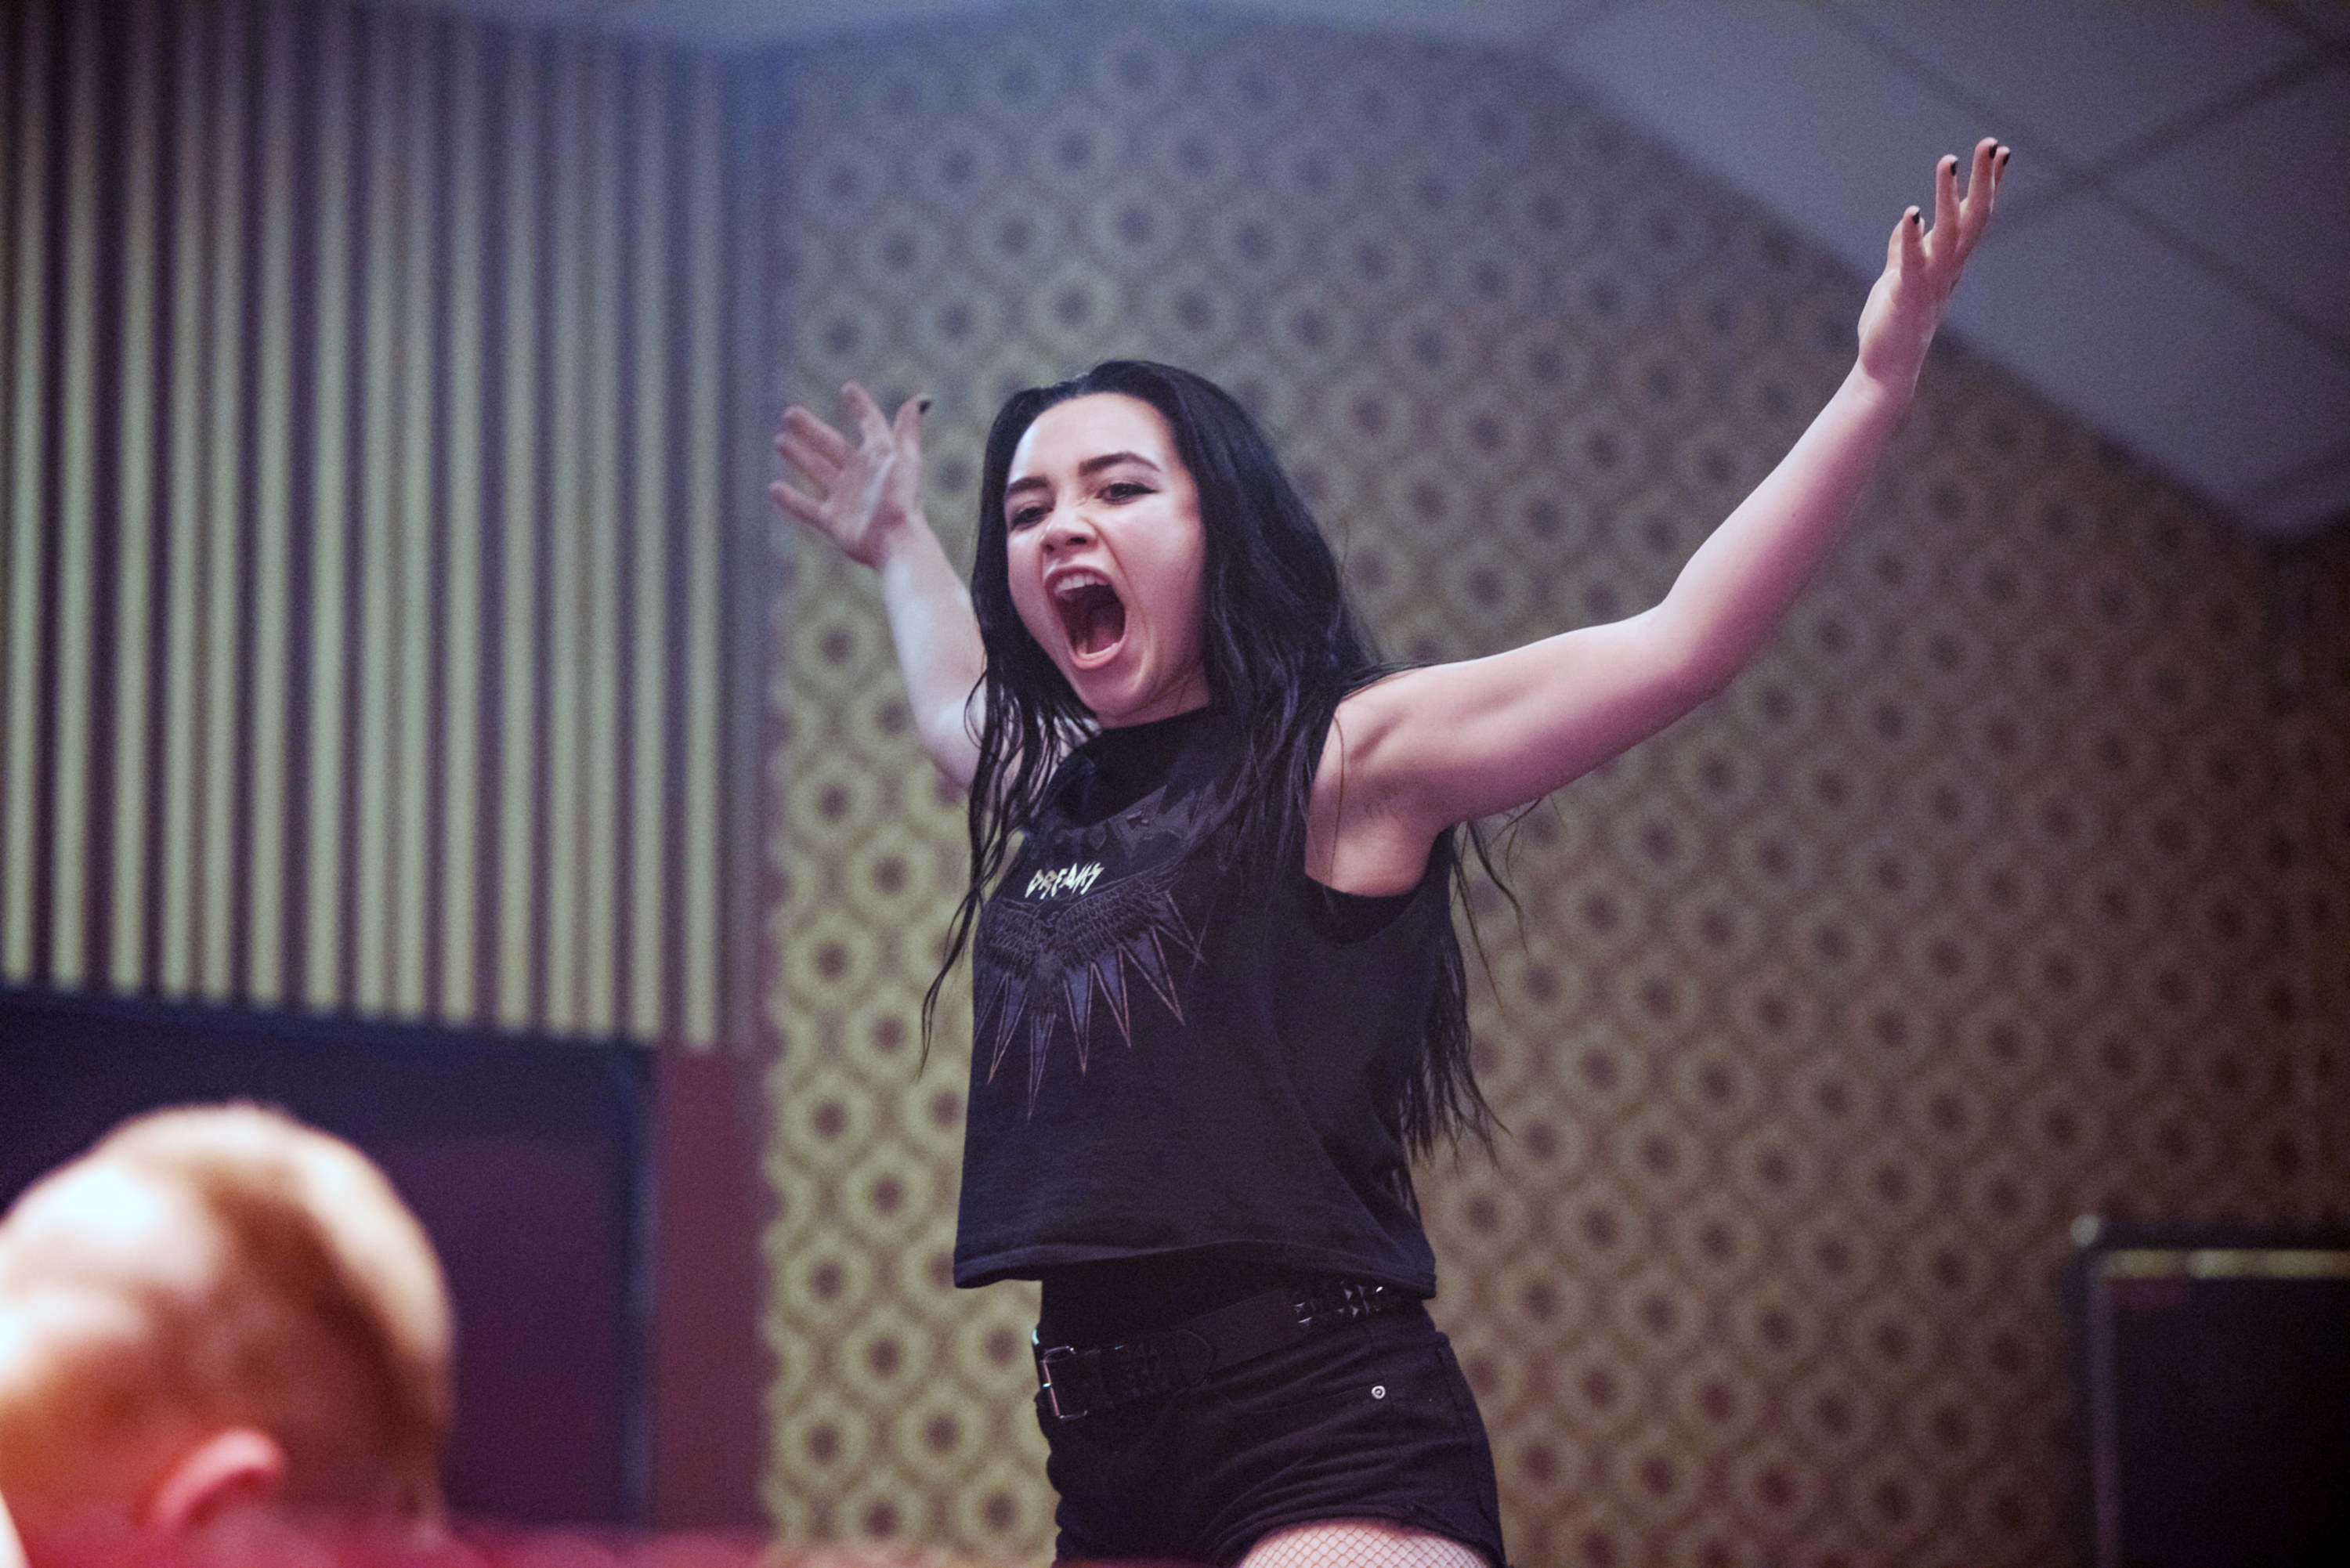 Florence Pugh shouts while wrestling